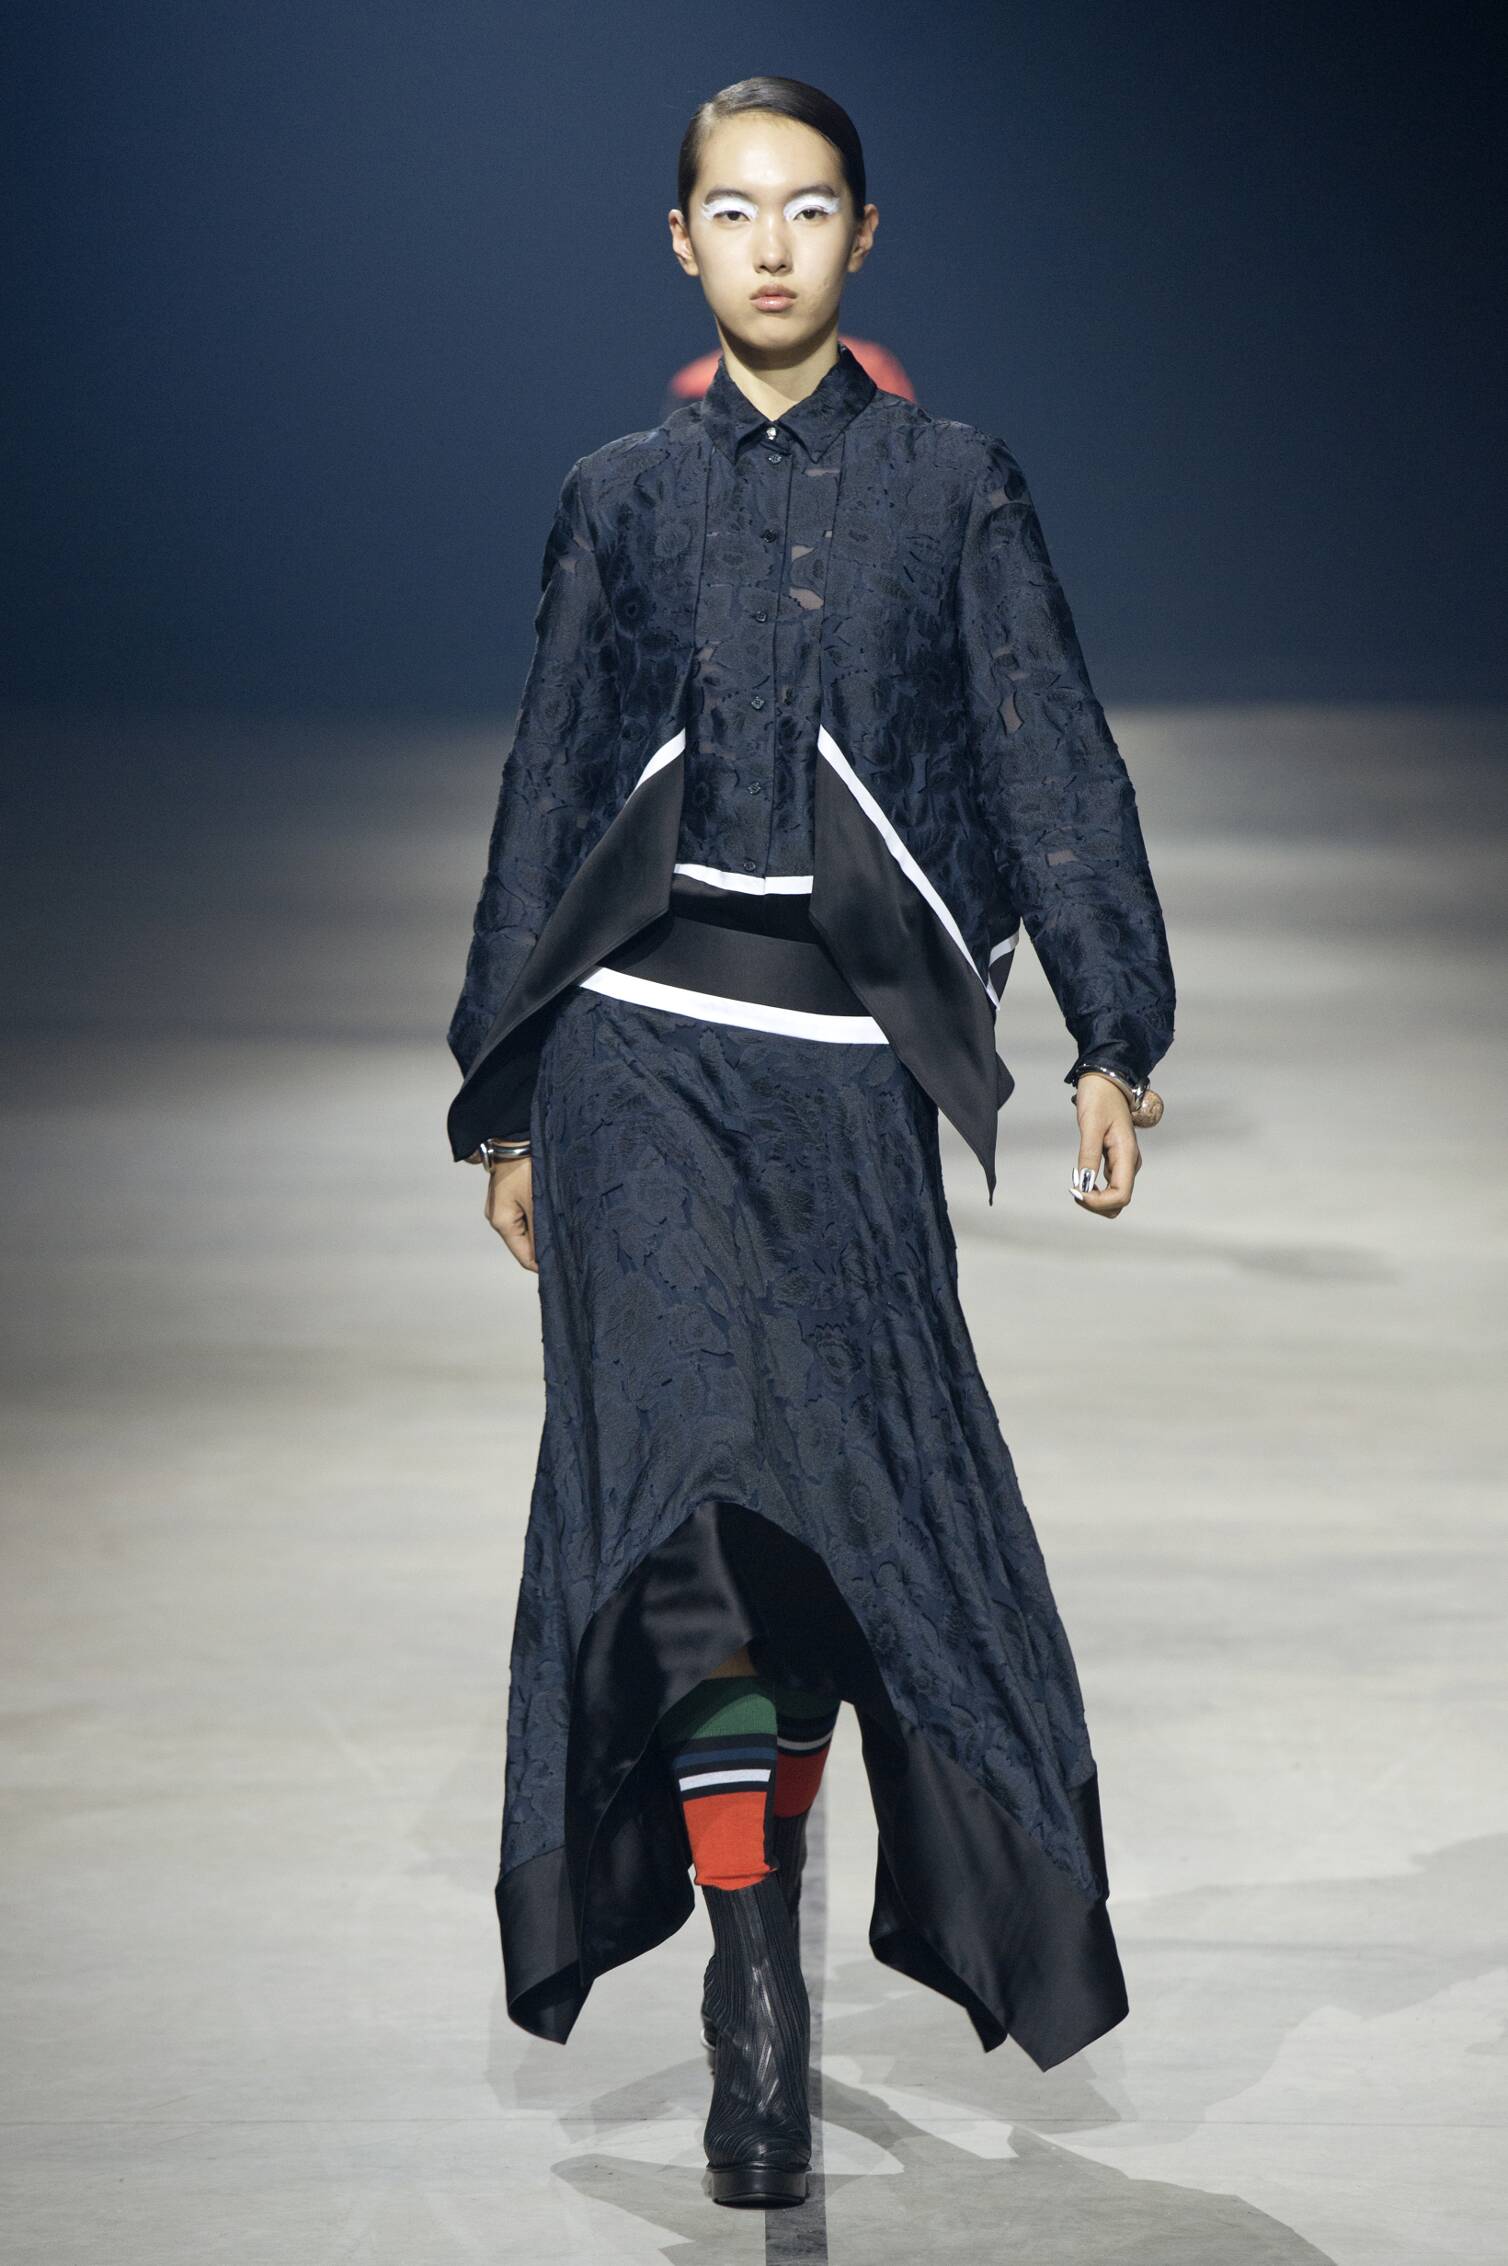 KENZO FALL WINTER 2015-16 WOMEN’S COLLECTION | The Skinny Beep